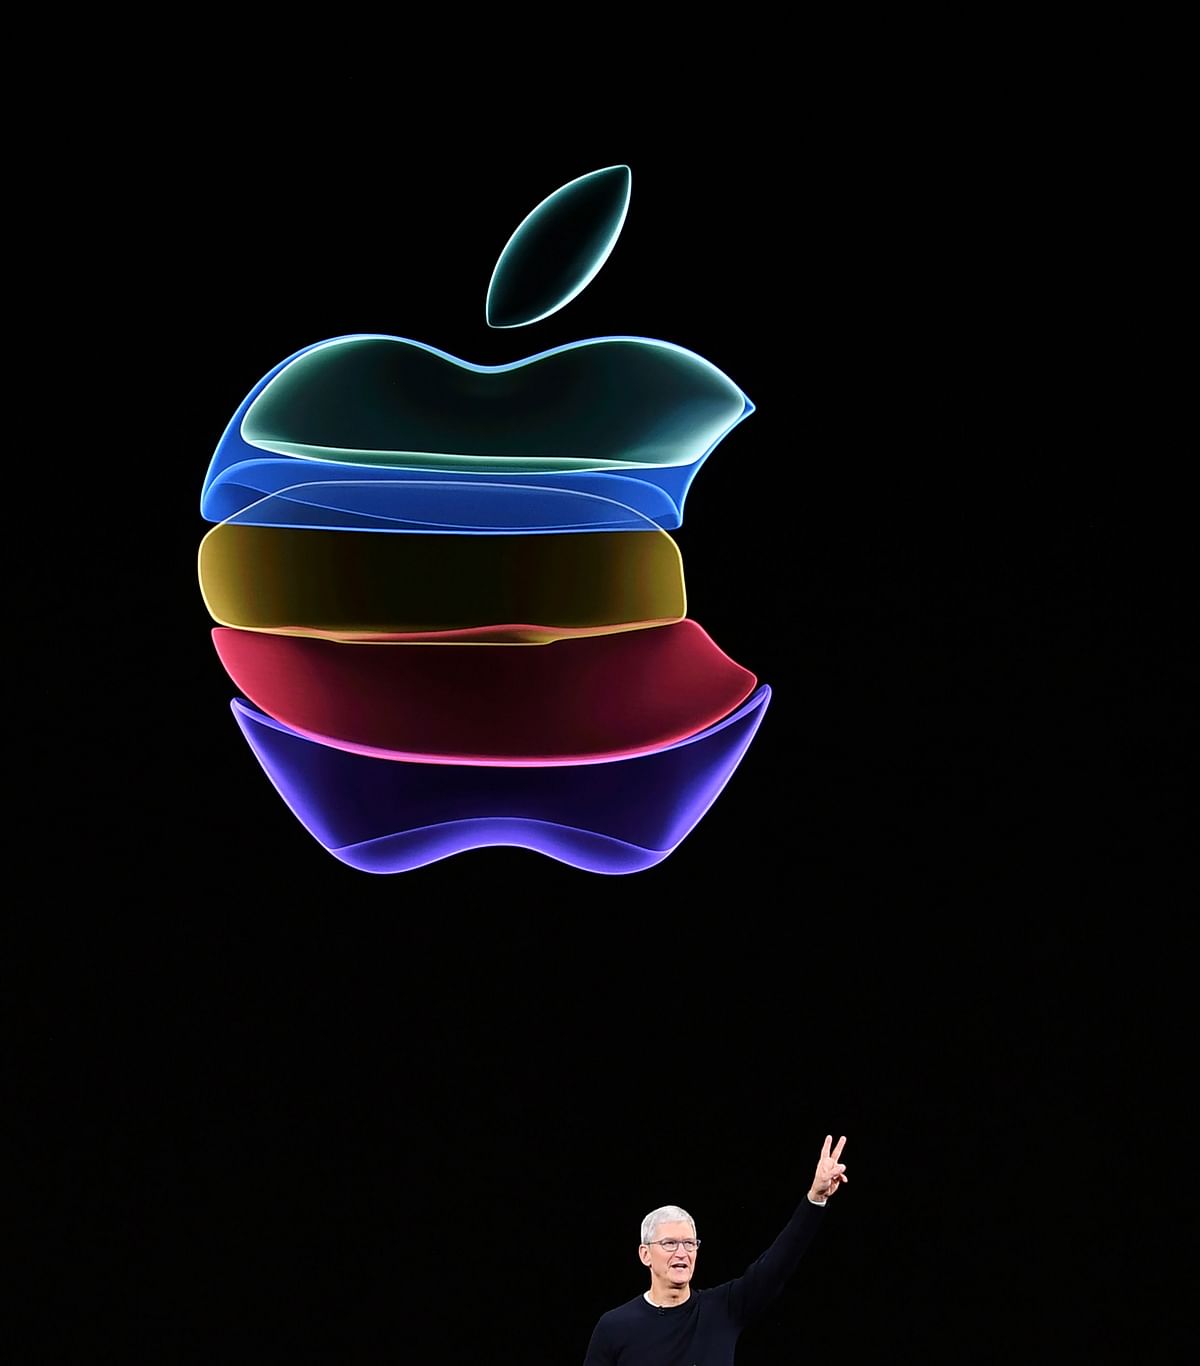 Apple CEO Tim Cook speaks on-stage during a product launch event at Apple`s headquarters in Cupertino, California on September 10, 2019. Photo: AFP